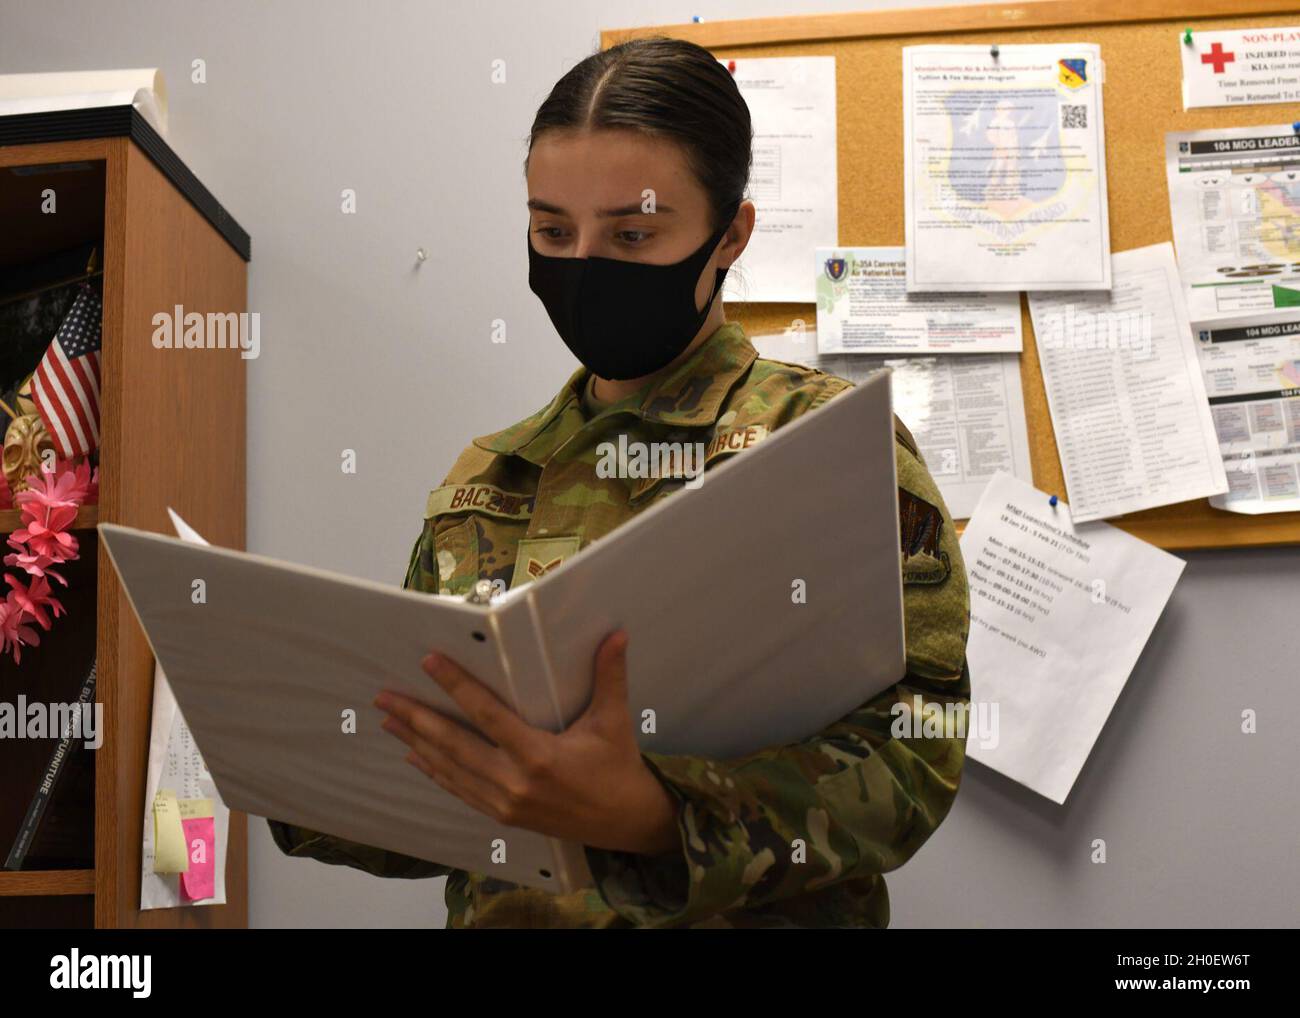 Senior Airman Weronika Baczek, public health technician, 104th Medical Group, views a binder, in her office at Barnes Air National Guard Base, Massachusetts, Feb. 17, 2021. Contact tracing is critical for safeguarding 104th Fighter Wing mission readiness and the health of our Barnestormers and surrounding communities from COVID-19. Stock Photo